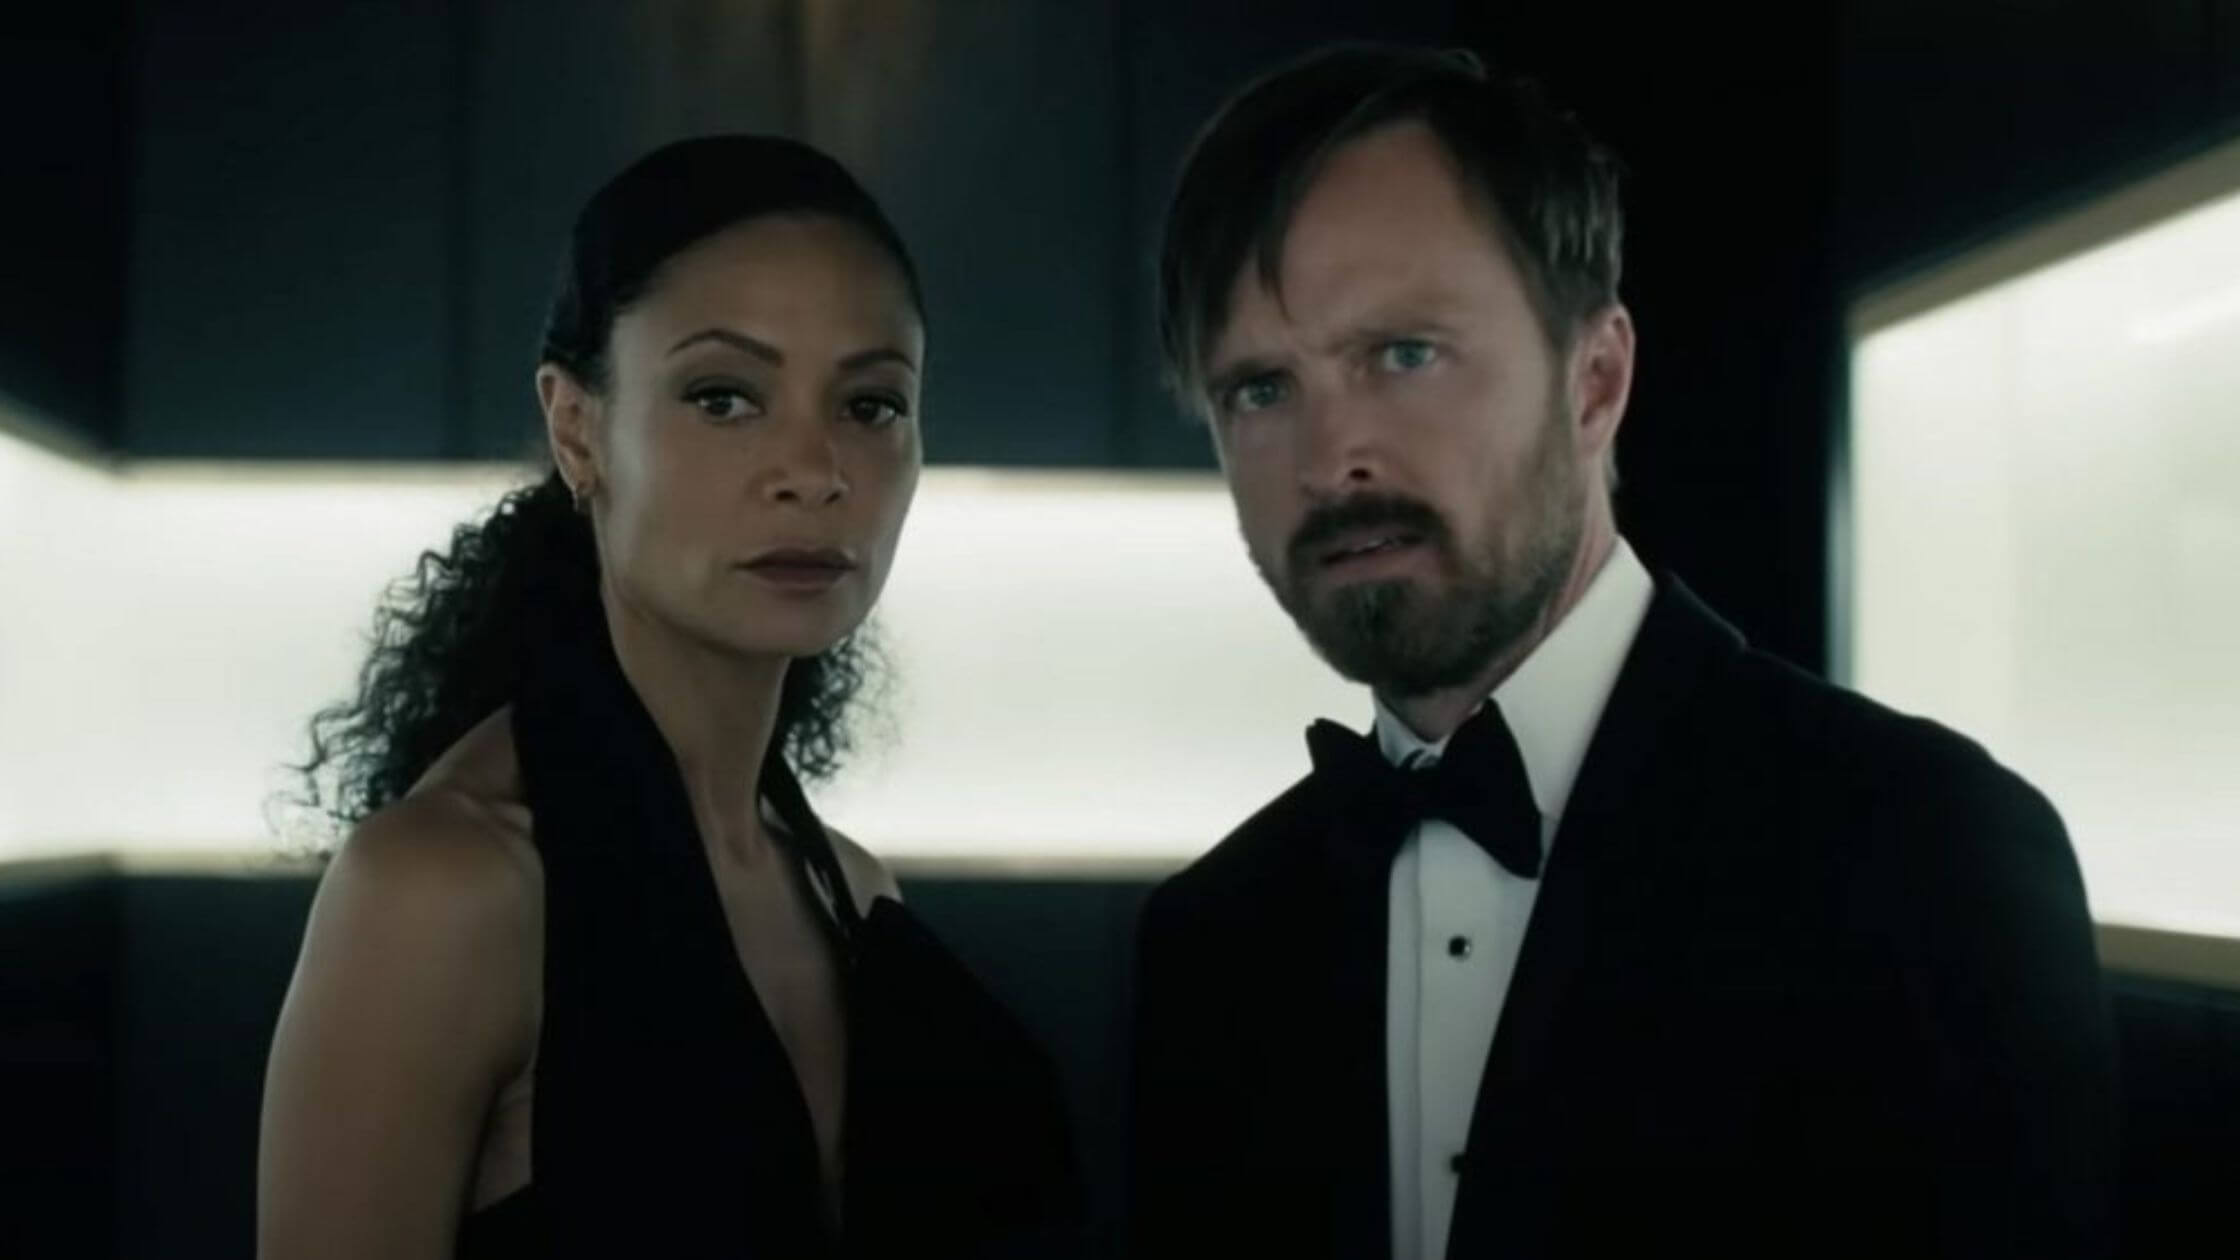 Westworld Season 4; Episode 2 ‘Well Enough Alone’ Ends At A Cliffhanger